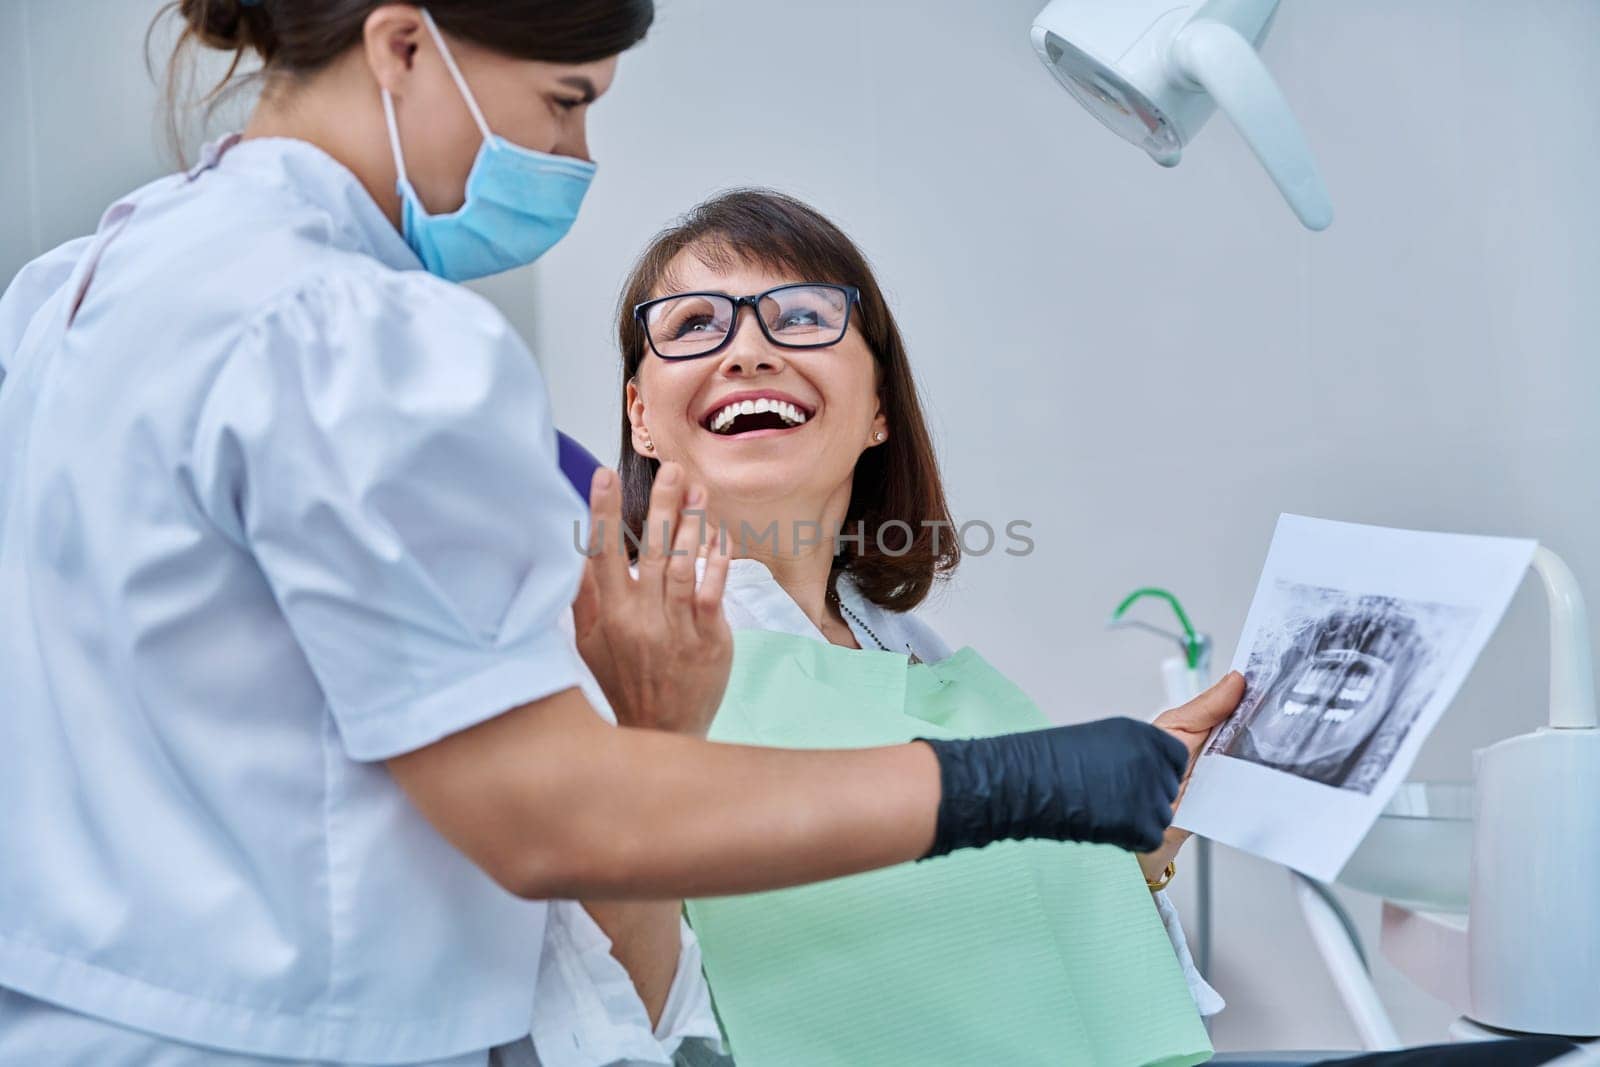 Female doctor dentist talking to middle aged woman patient in dental chair, discussing x-rays of teeth and jaws. Dental treatment and prosthetics, implantation, health care concept